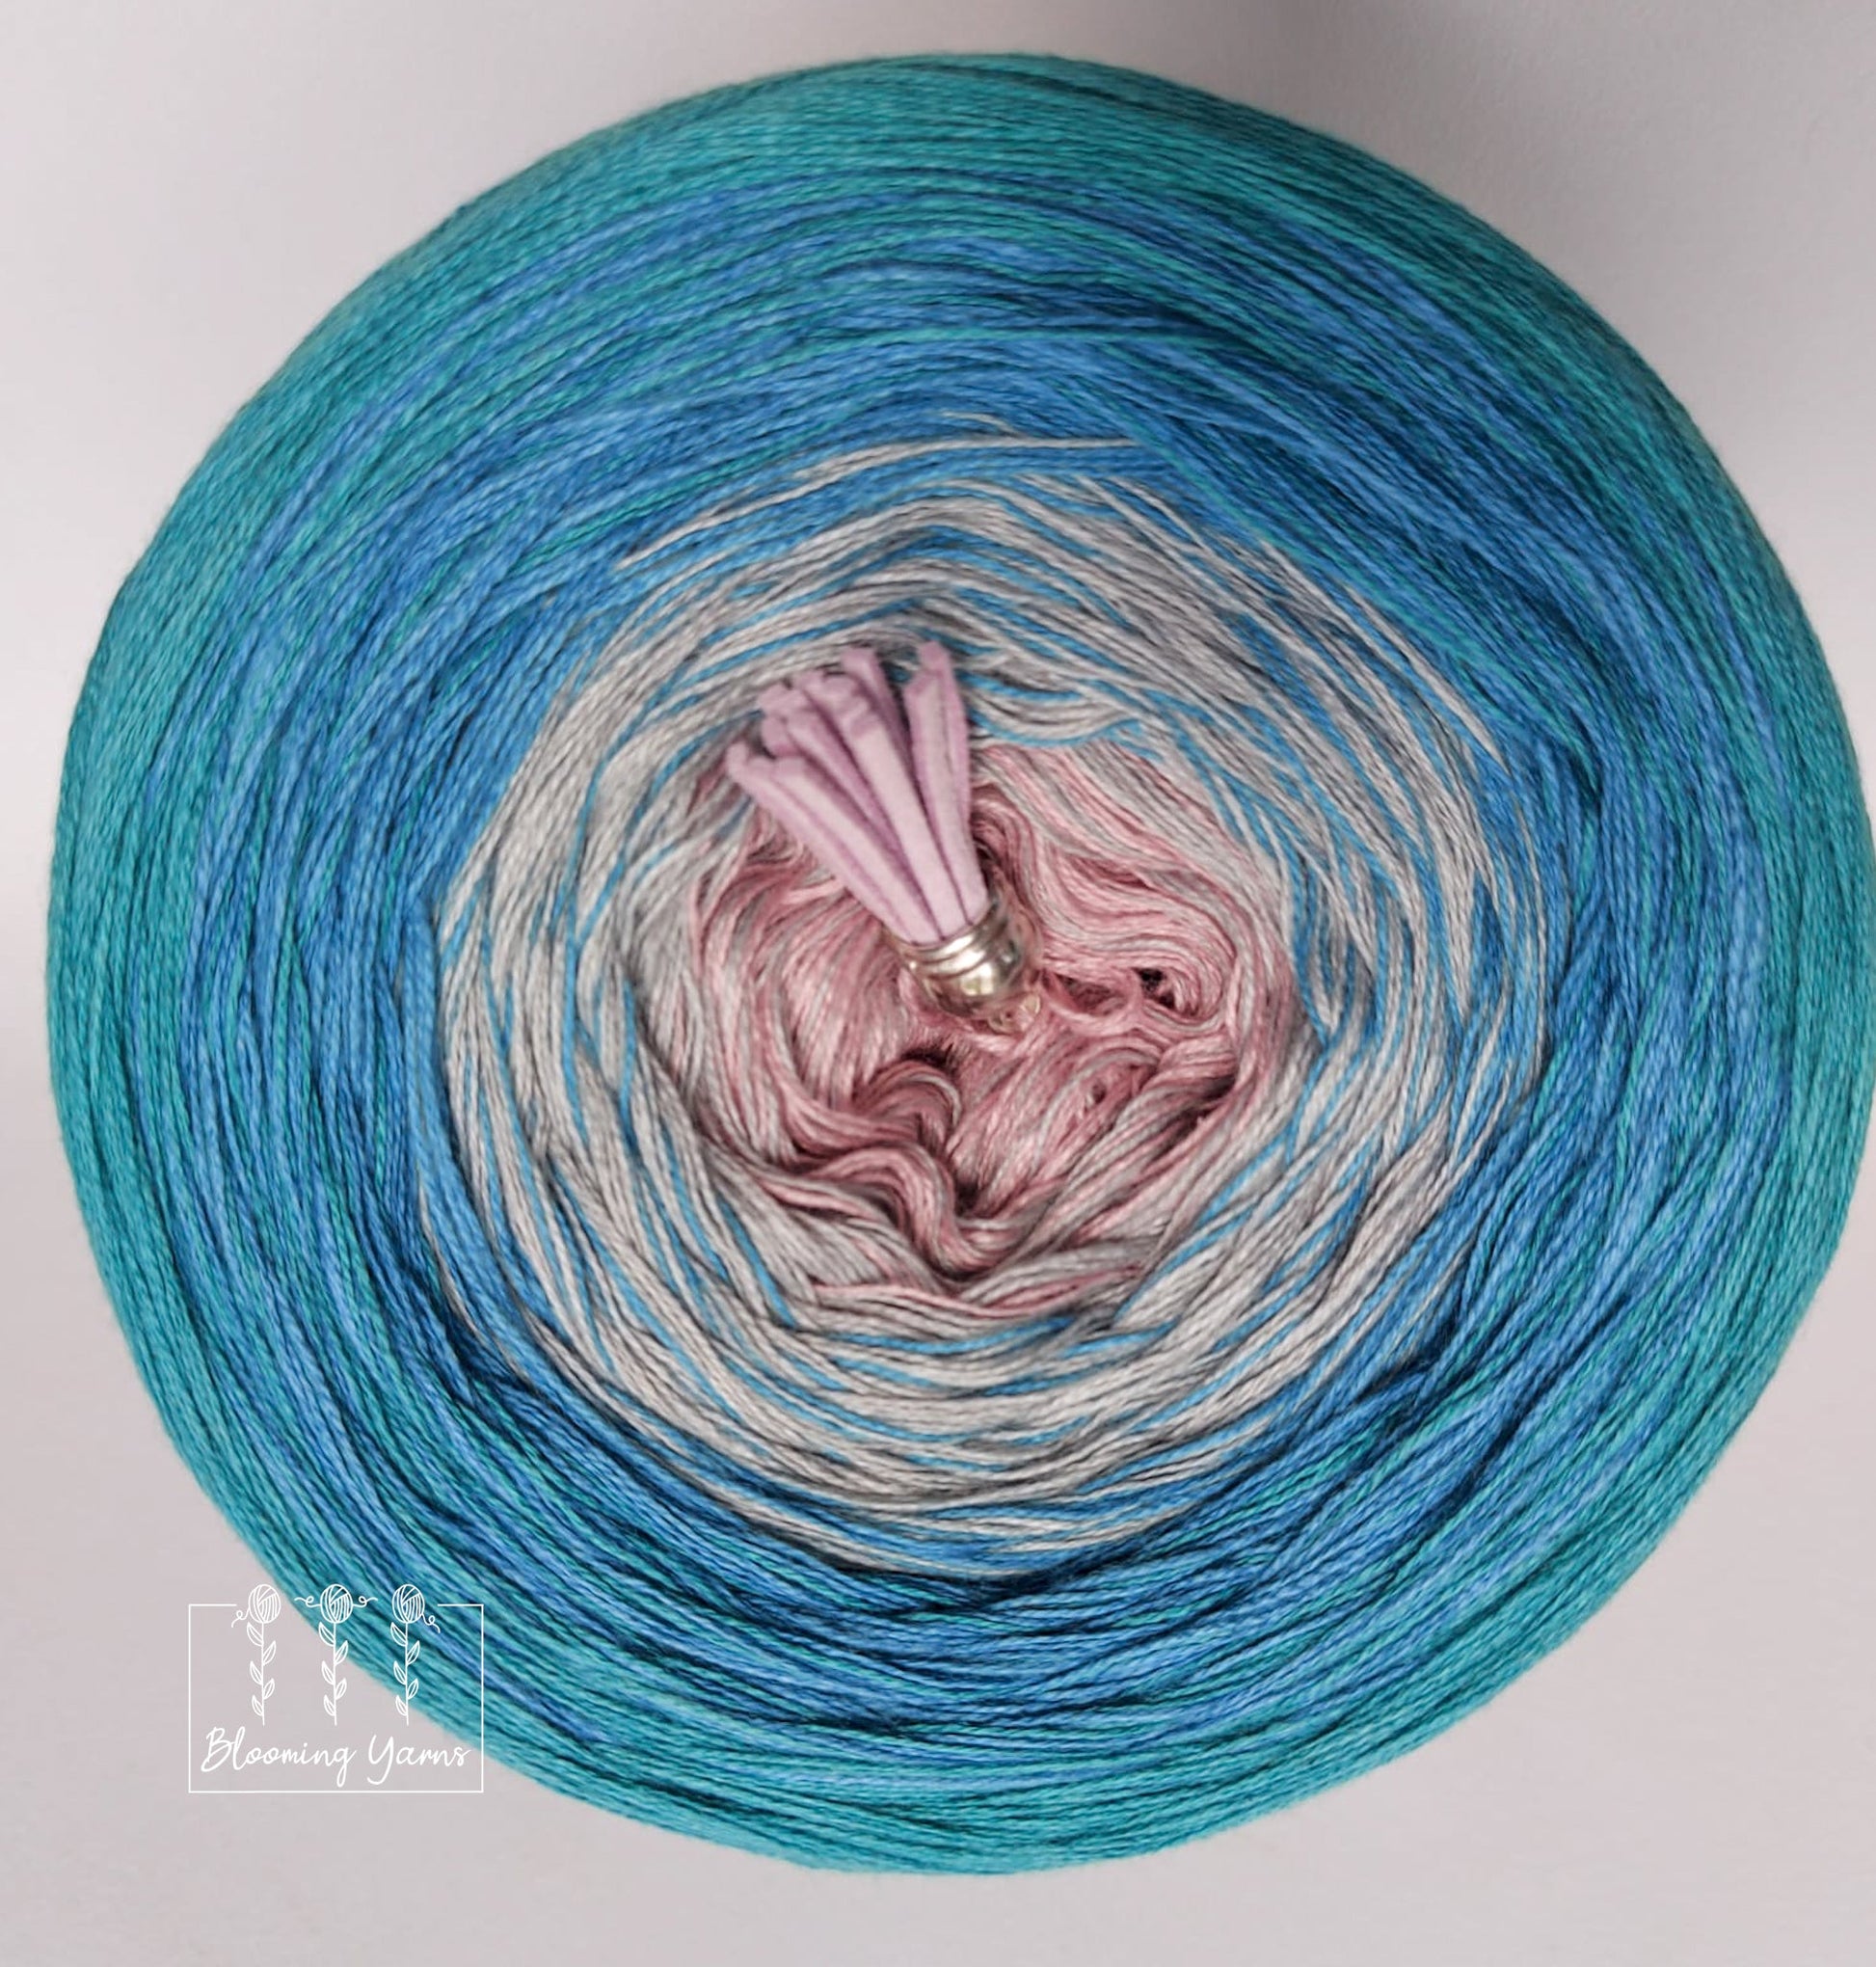 Gradient yarn cake, colour combination CM198 – Blooming Yarns by KW